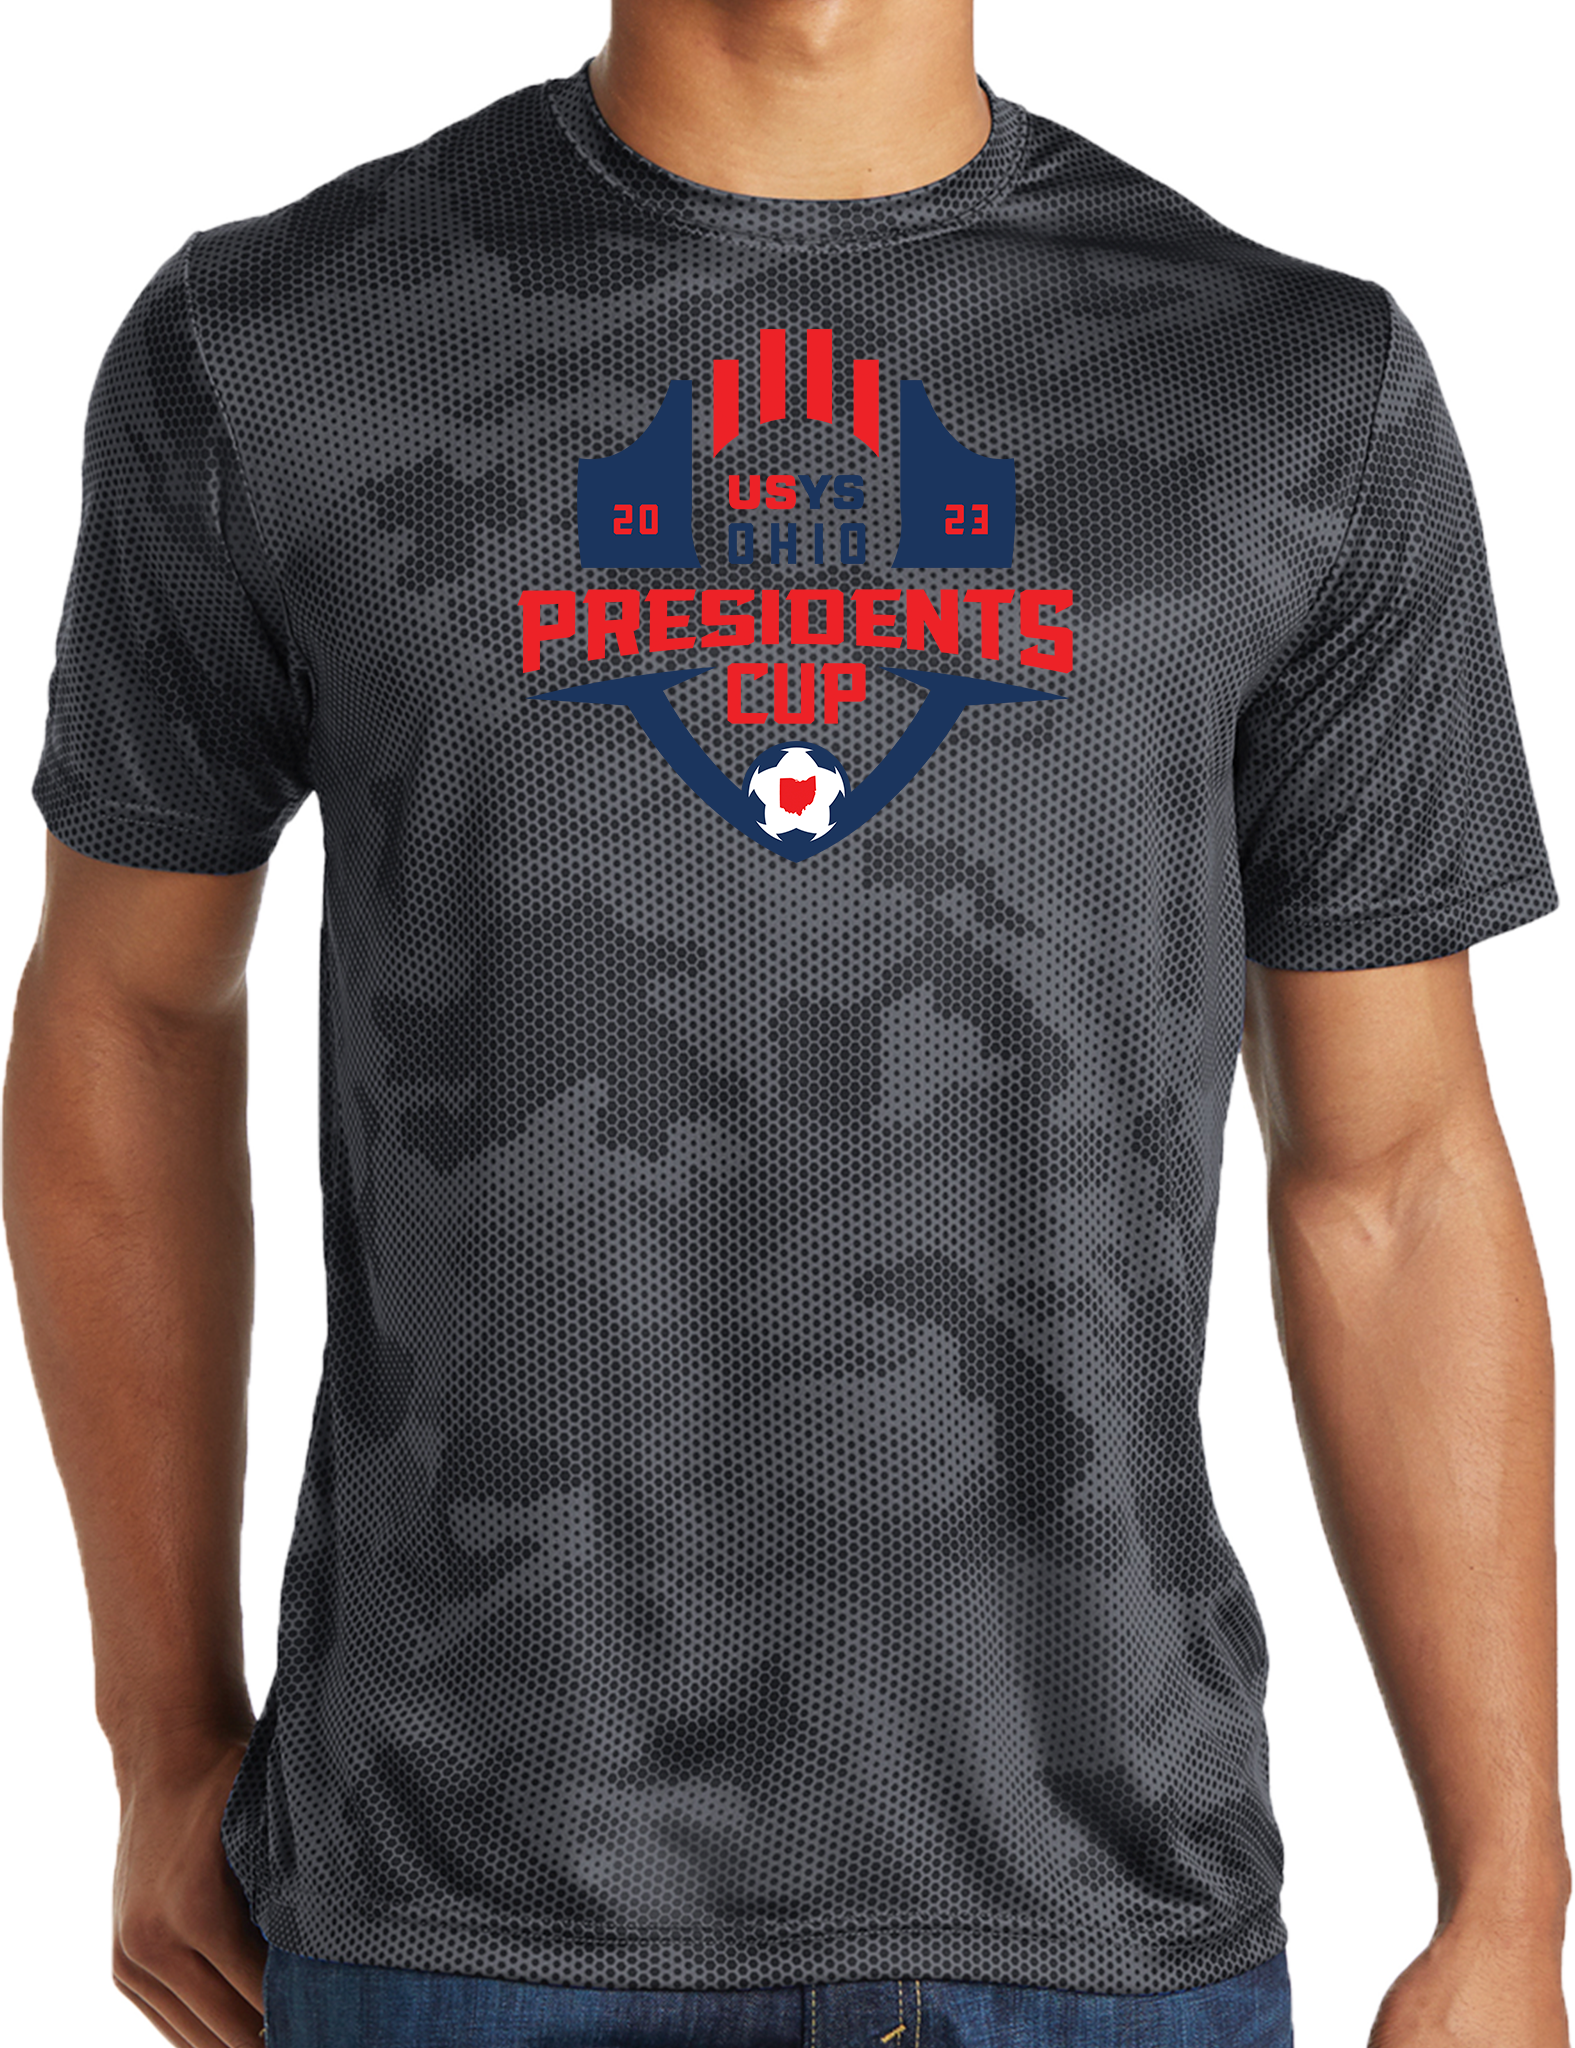 PERFORMANCE SHIRTS - 2023 USYS Ohio Presidents Cup